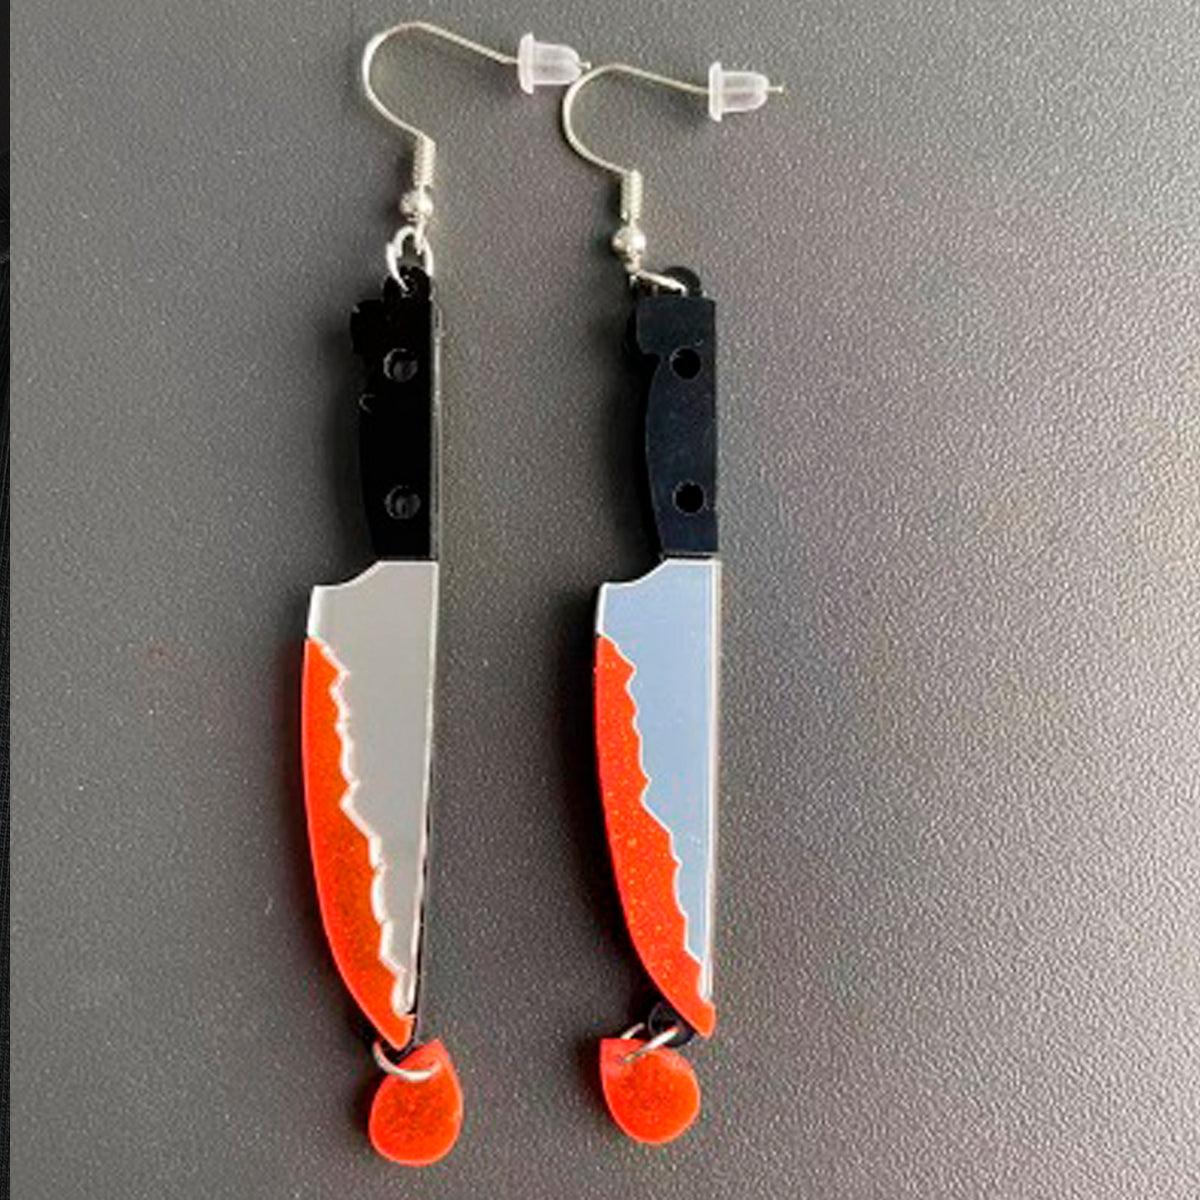 Bloody Knife Horror Aesthetic Earrings - Aesthetic Clothes Shop